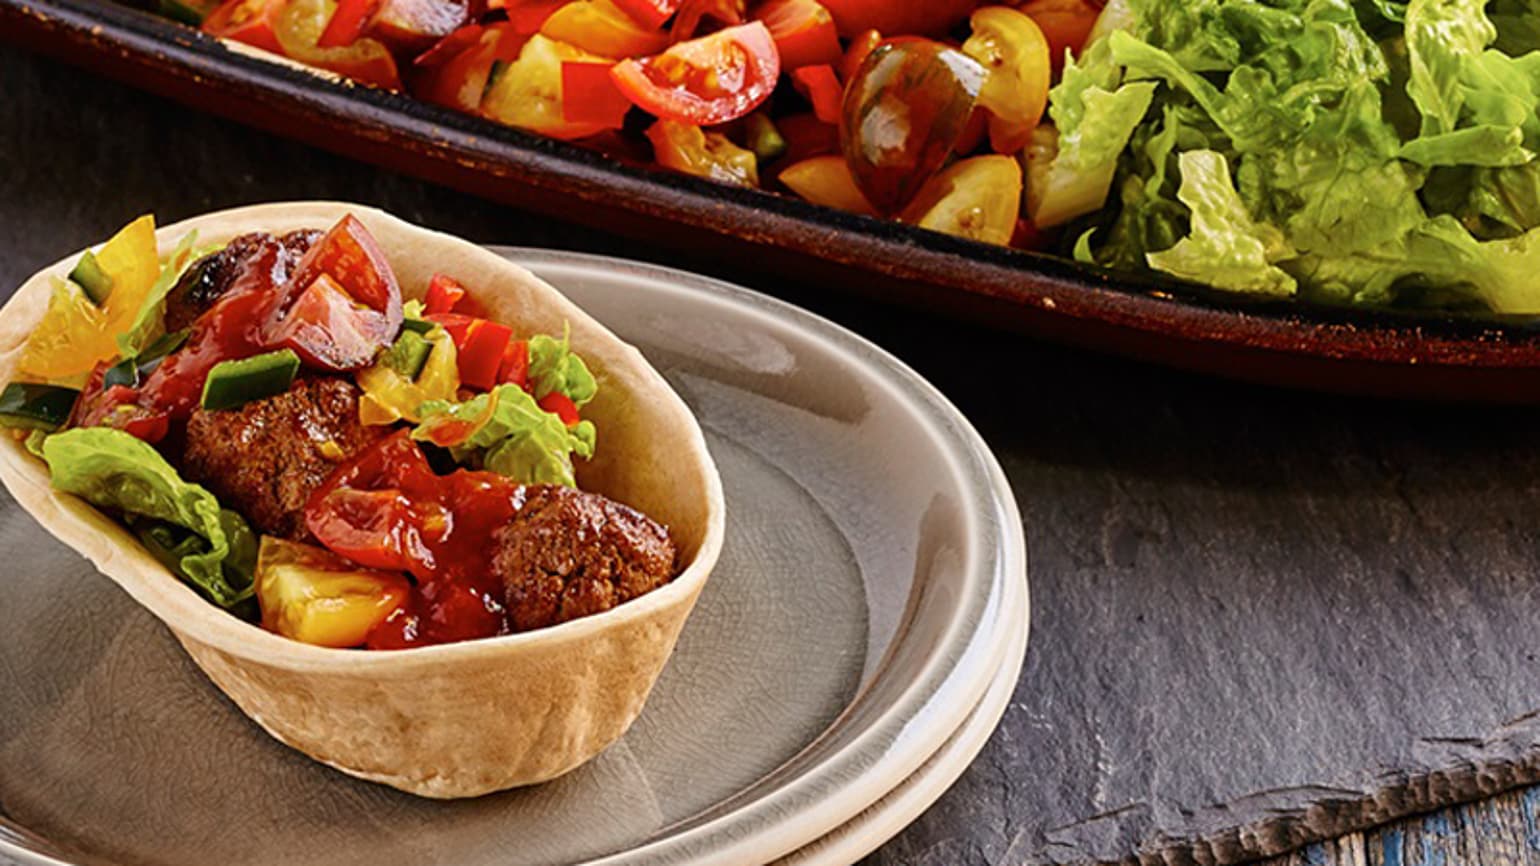 Stand ‘N Stuff™ Soft Tacos with Smoky BBQ Meatballs and Tomato Salsa